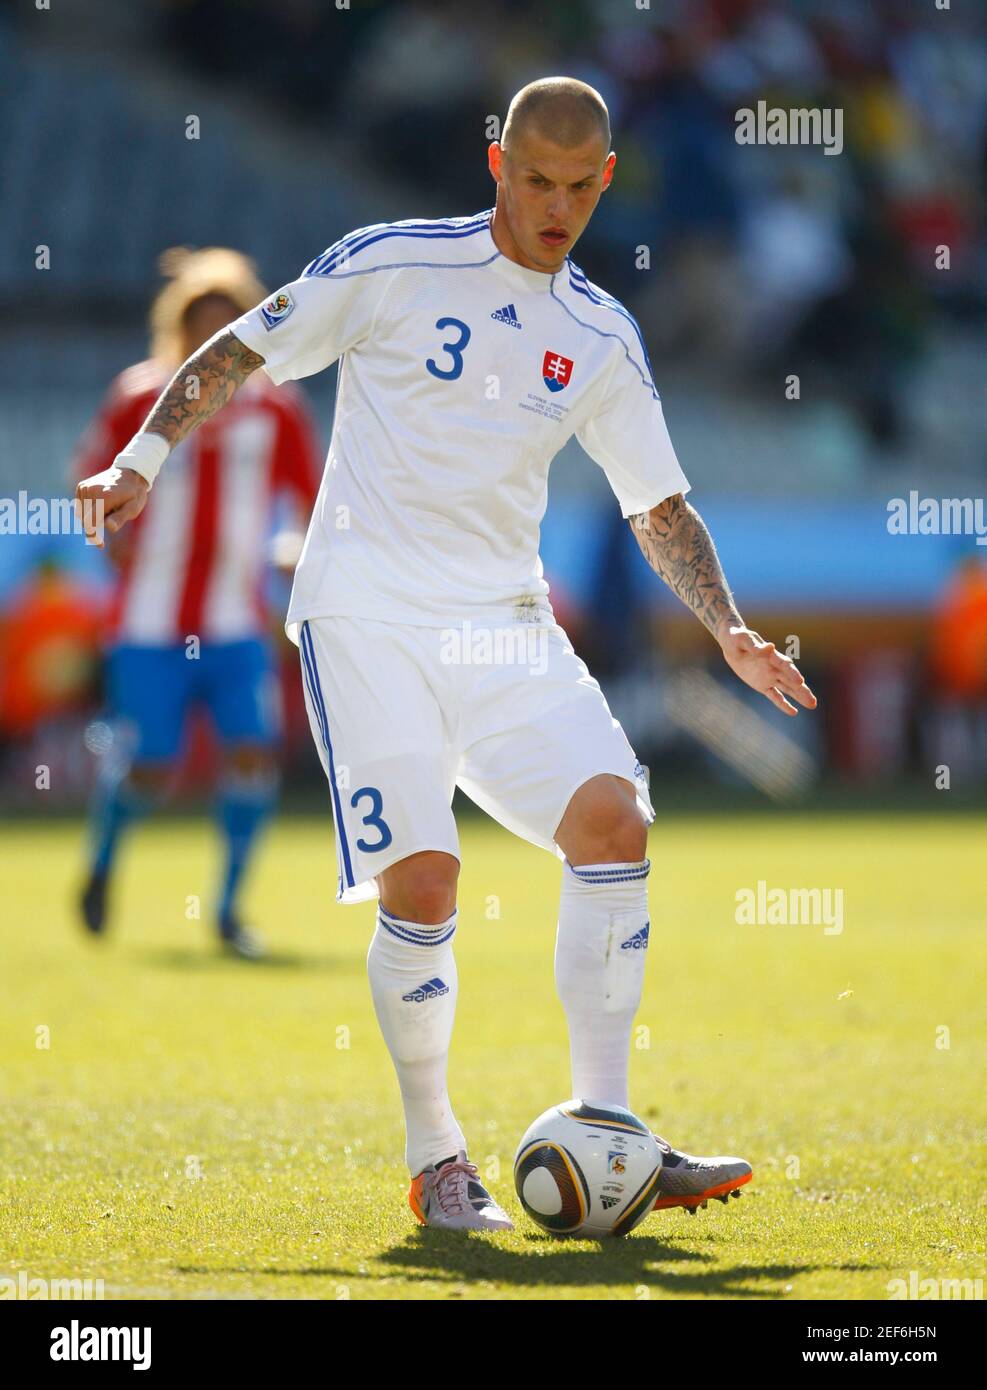 Football - Slovakia v Paraguay - FIFA World Cup South Africa 2010 - Group F  - Free State Stadium, Bloemfontein, South Africa - 20/6/10 Martin Skrtel -  Slovakia Mandatory Credit: Action Images / John Sibley Stock Photo - Alamy